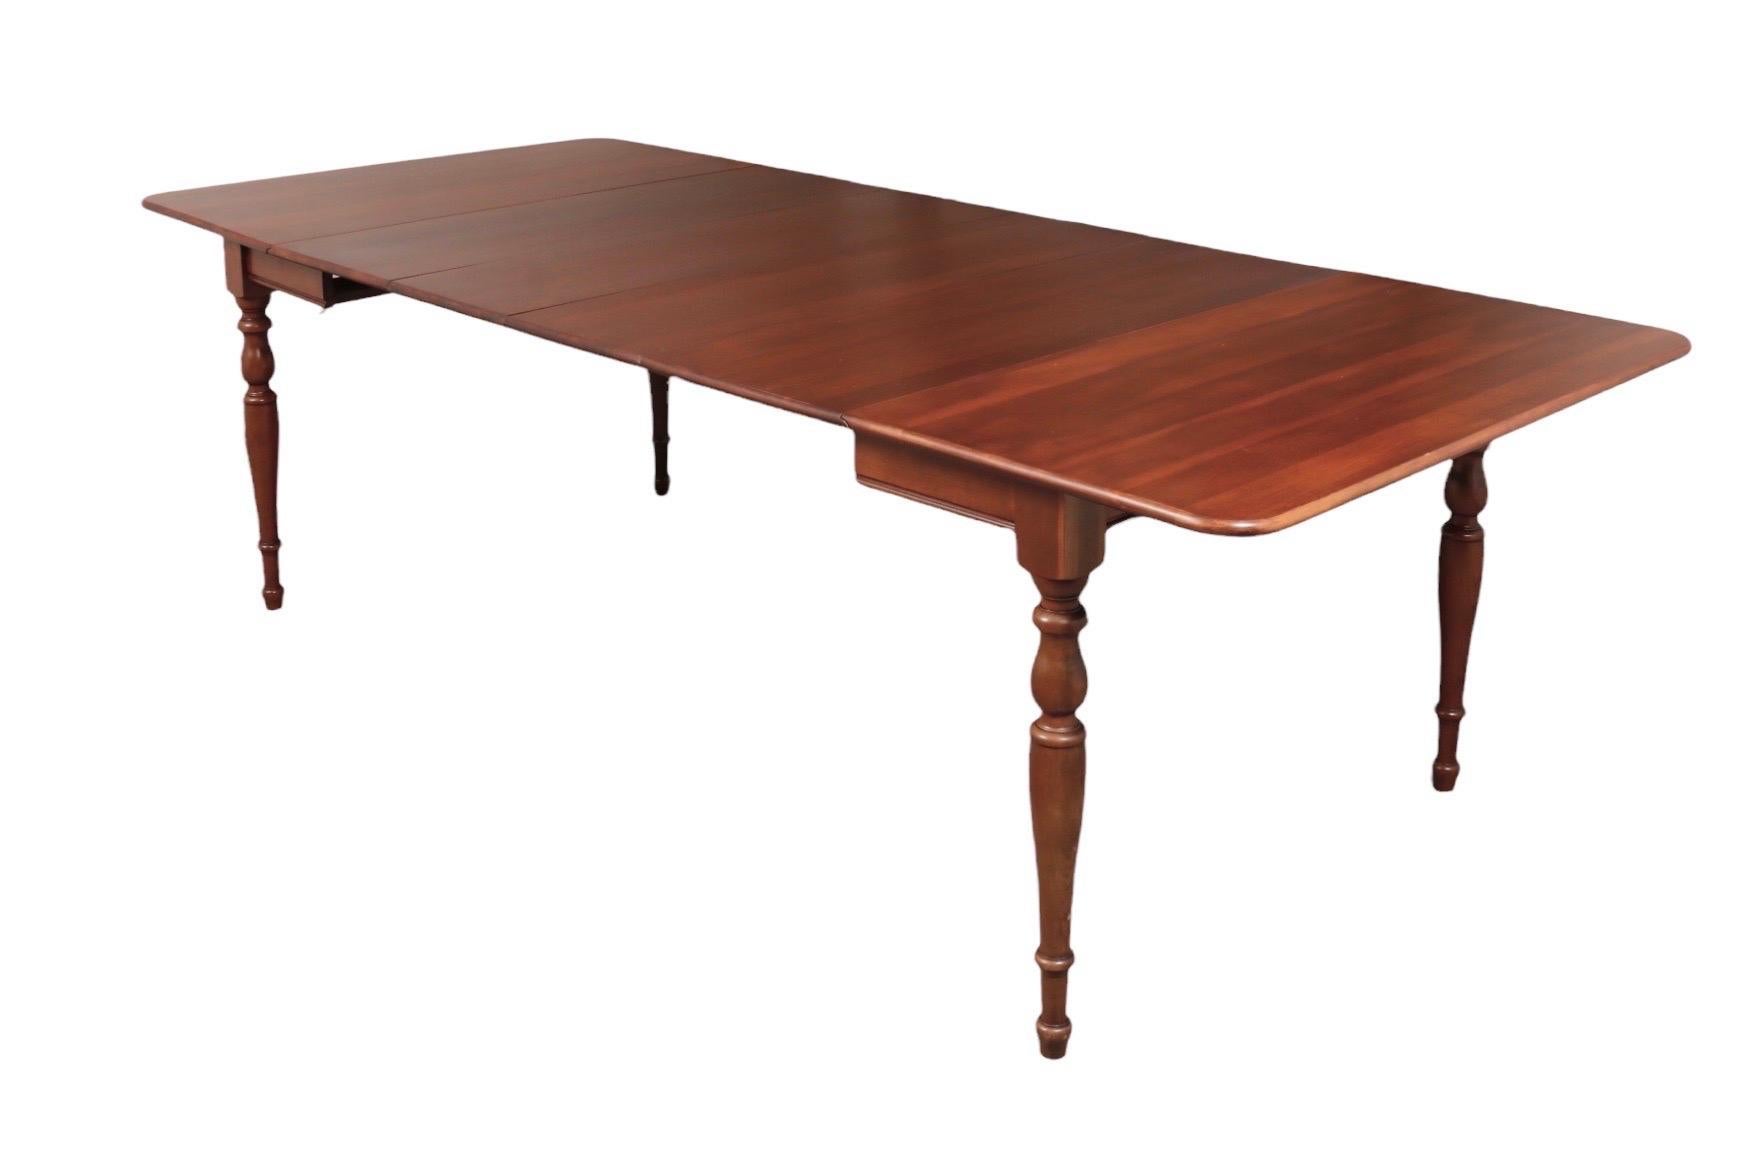 A traditional drop leaf dining table made by Taylor-Jamestown, dating from the 1960’s. Made of solid cherry wood, the table extends with two drop leaves and two additional leaves to comfortably seat ten. Supported by turned legs finished with blunt